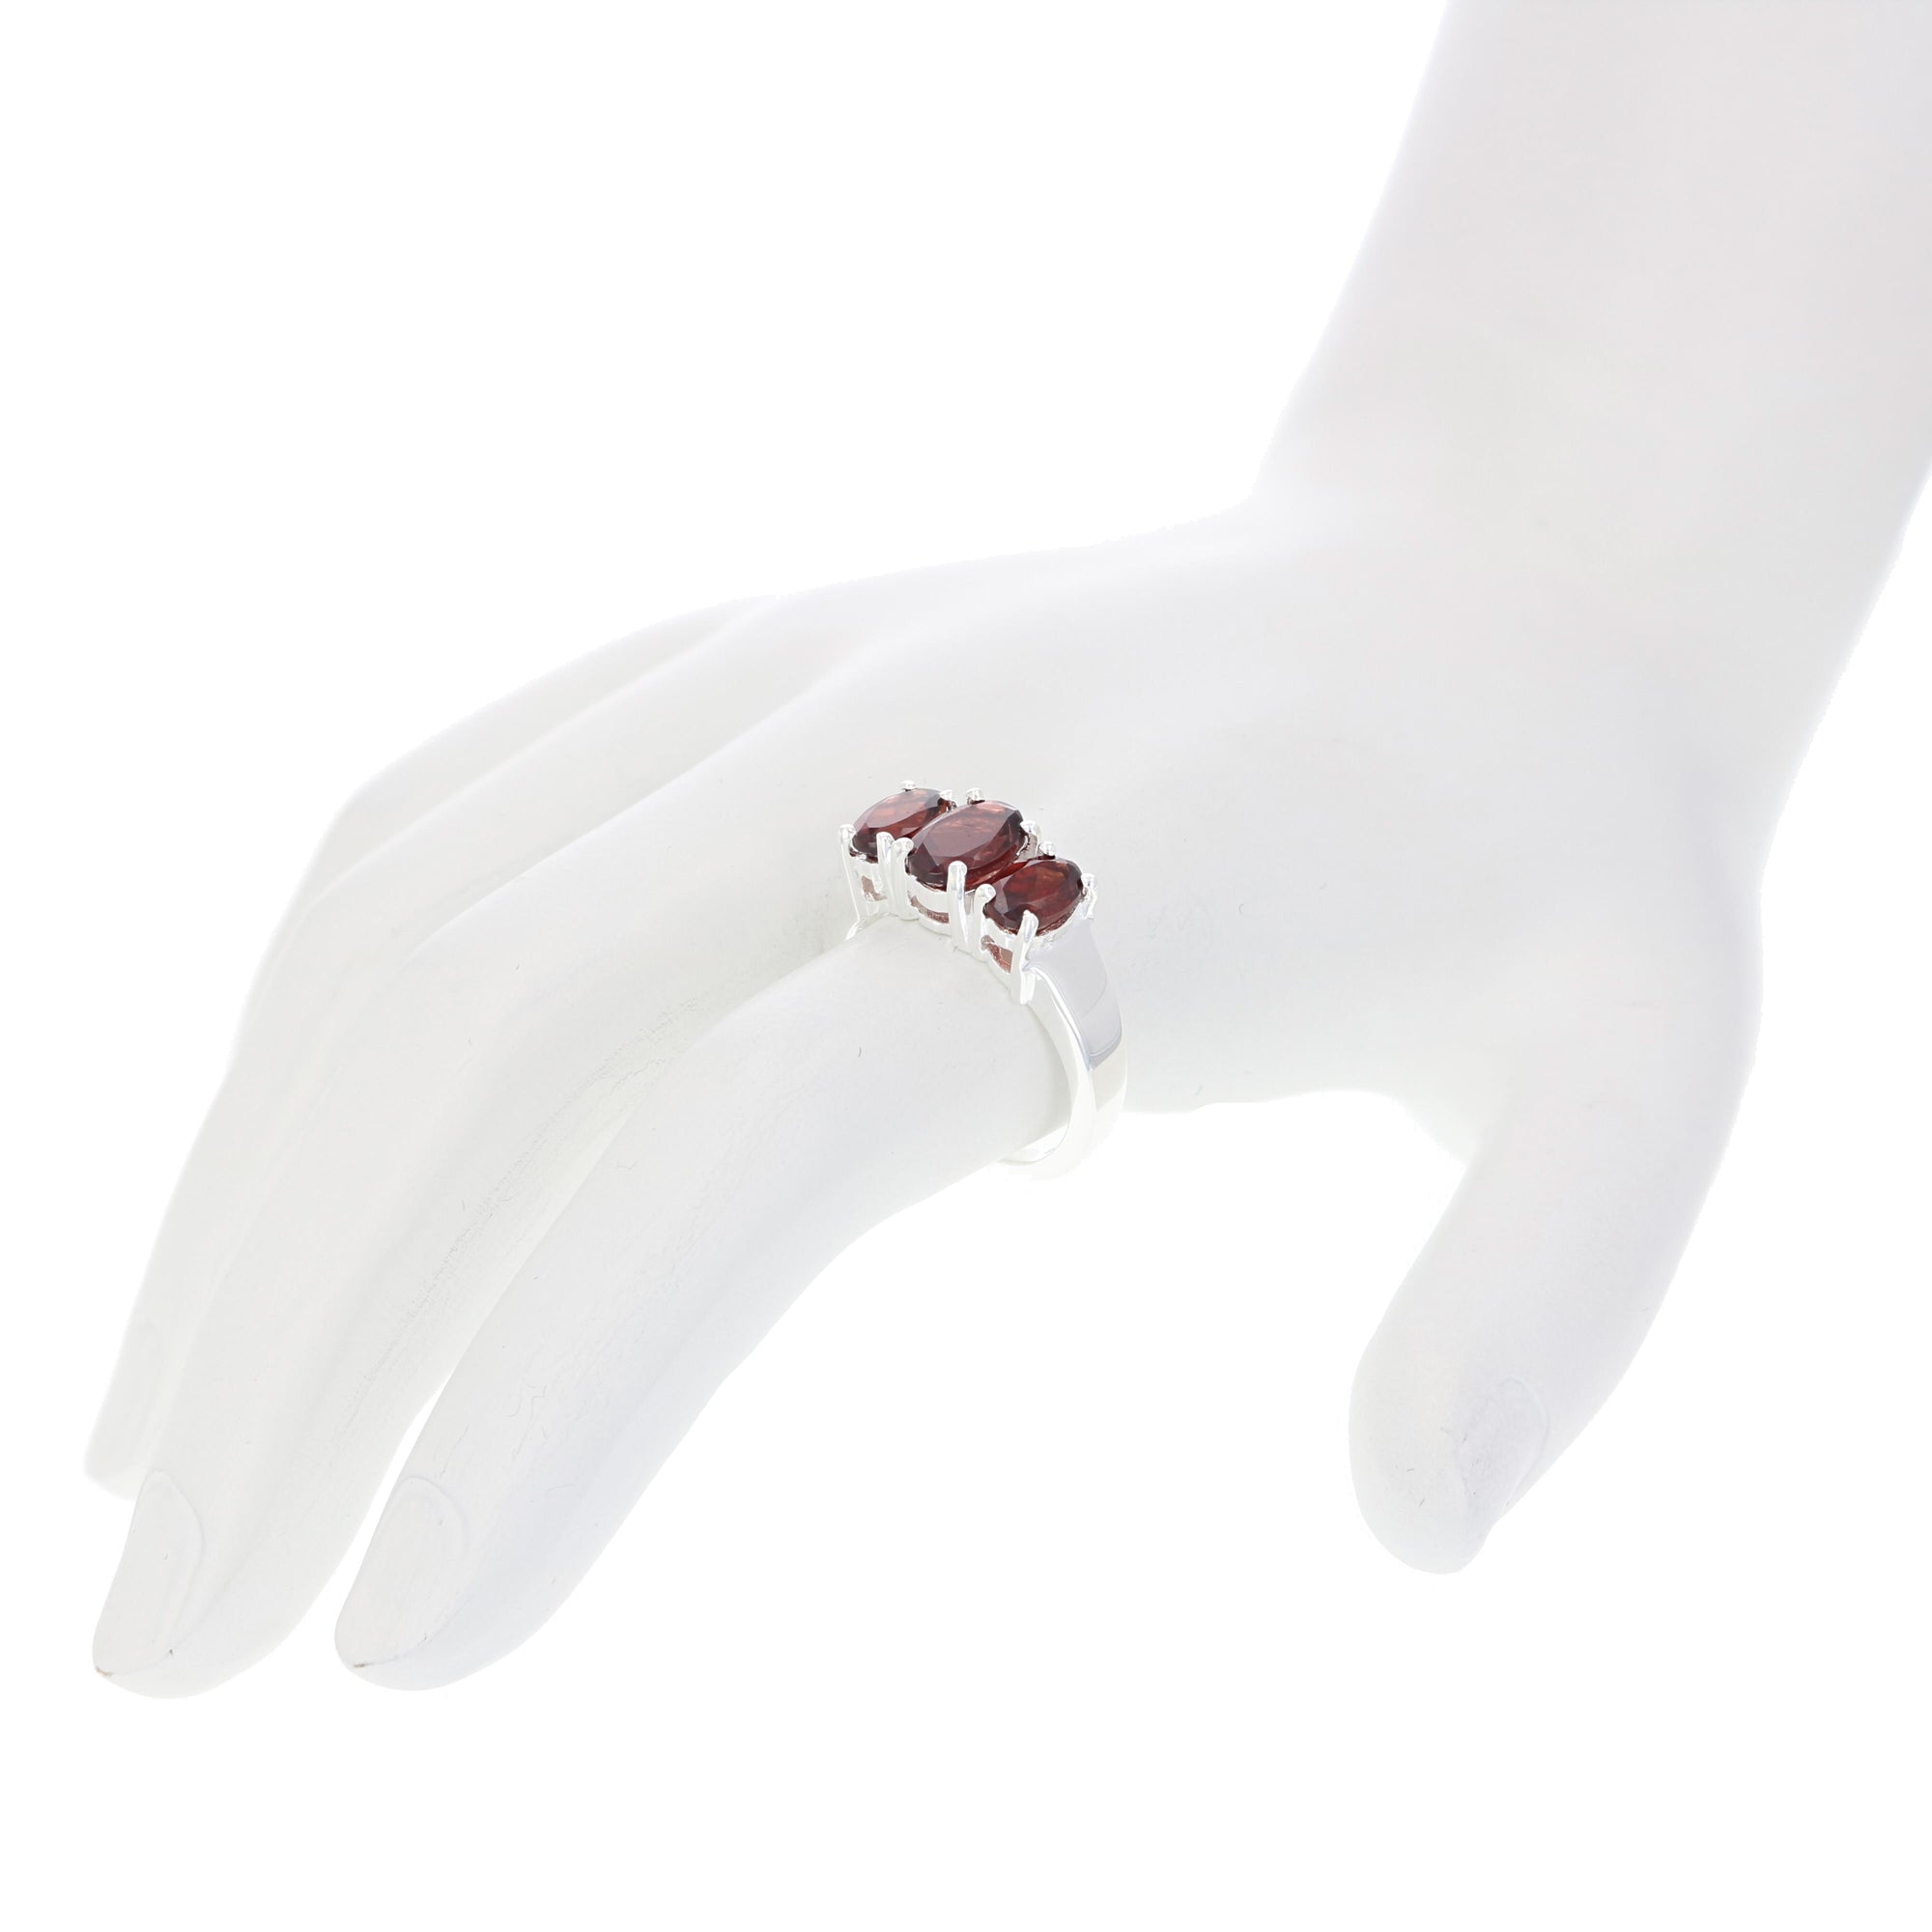 1.50 cttw Garnet Ring in .925 Sterling Silver with Rhodium Plating Oval Shape